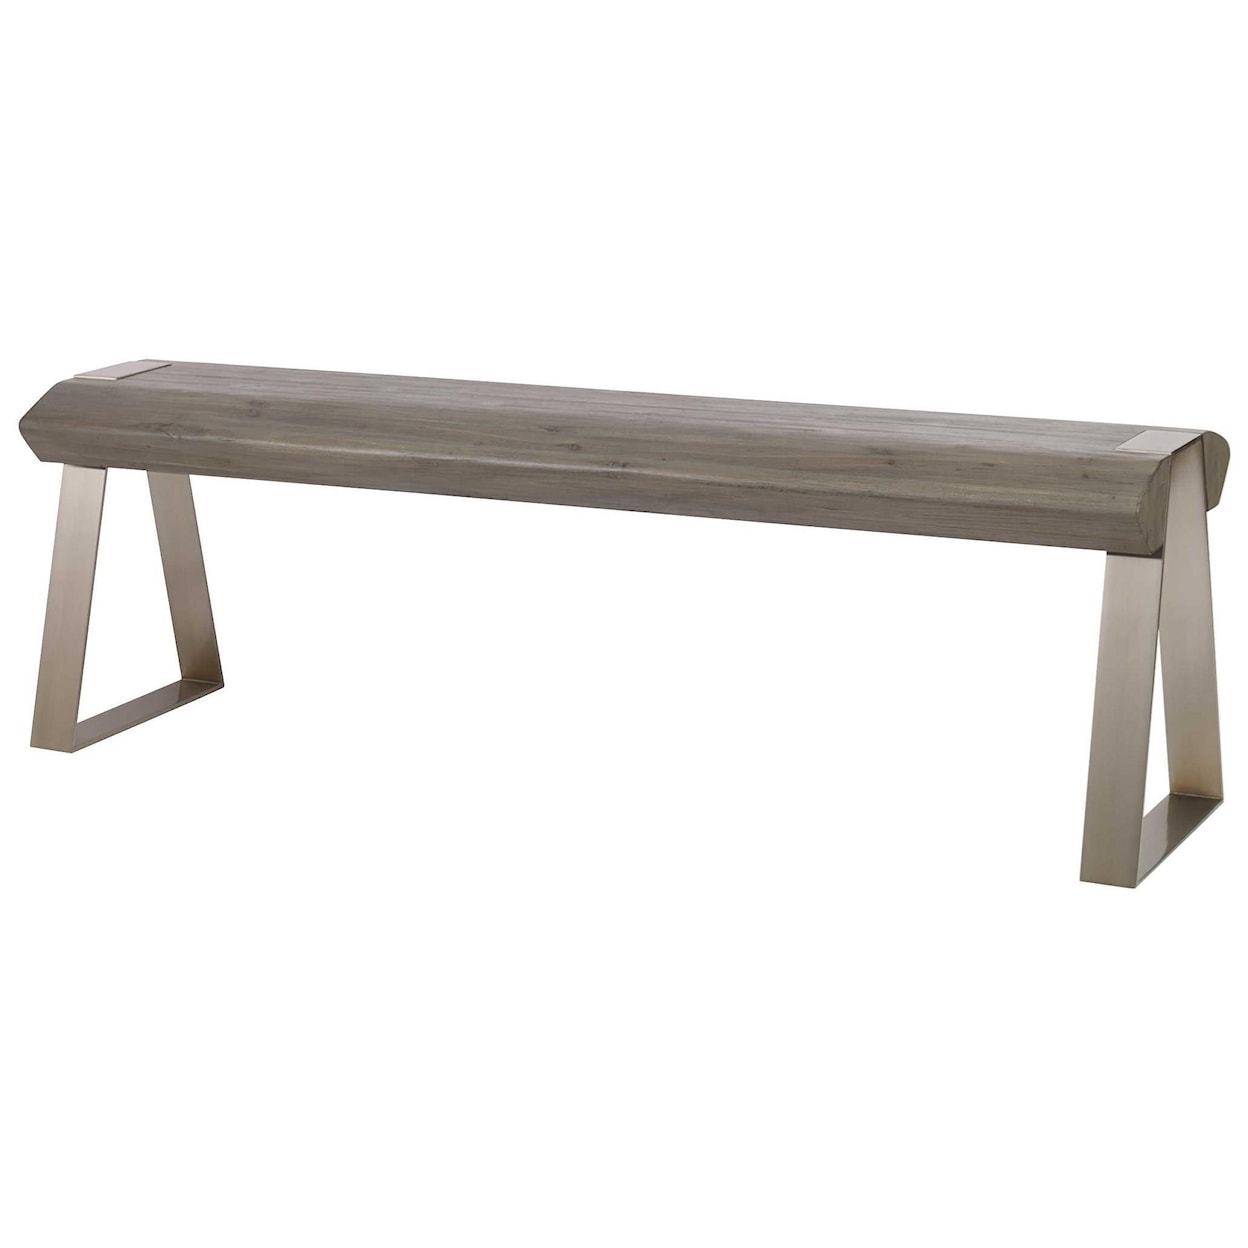 Uttermost Accent Furniture - Benches Acai Light Gray Bench